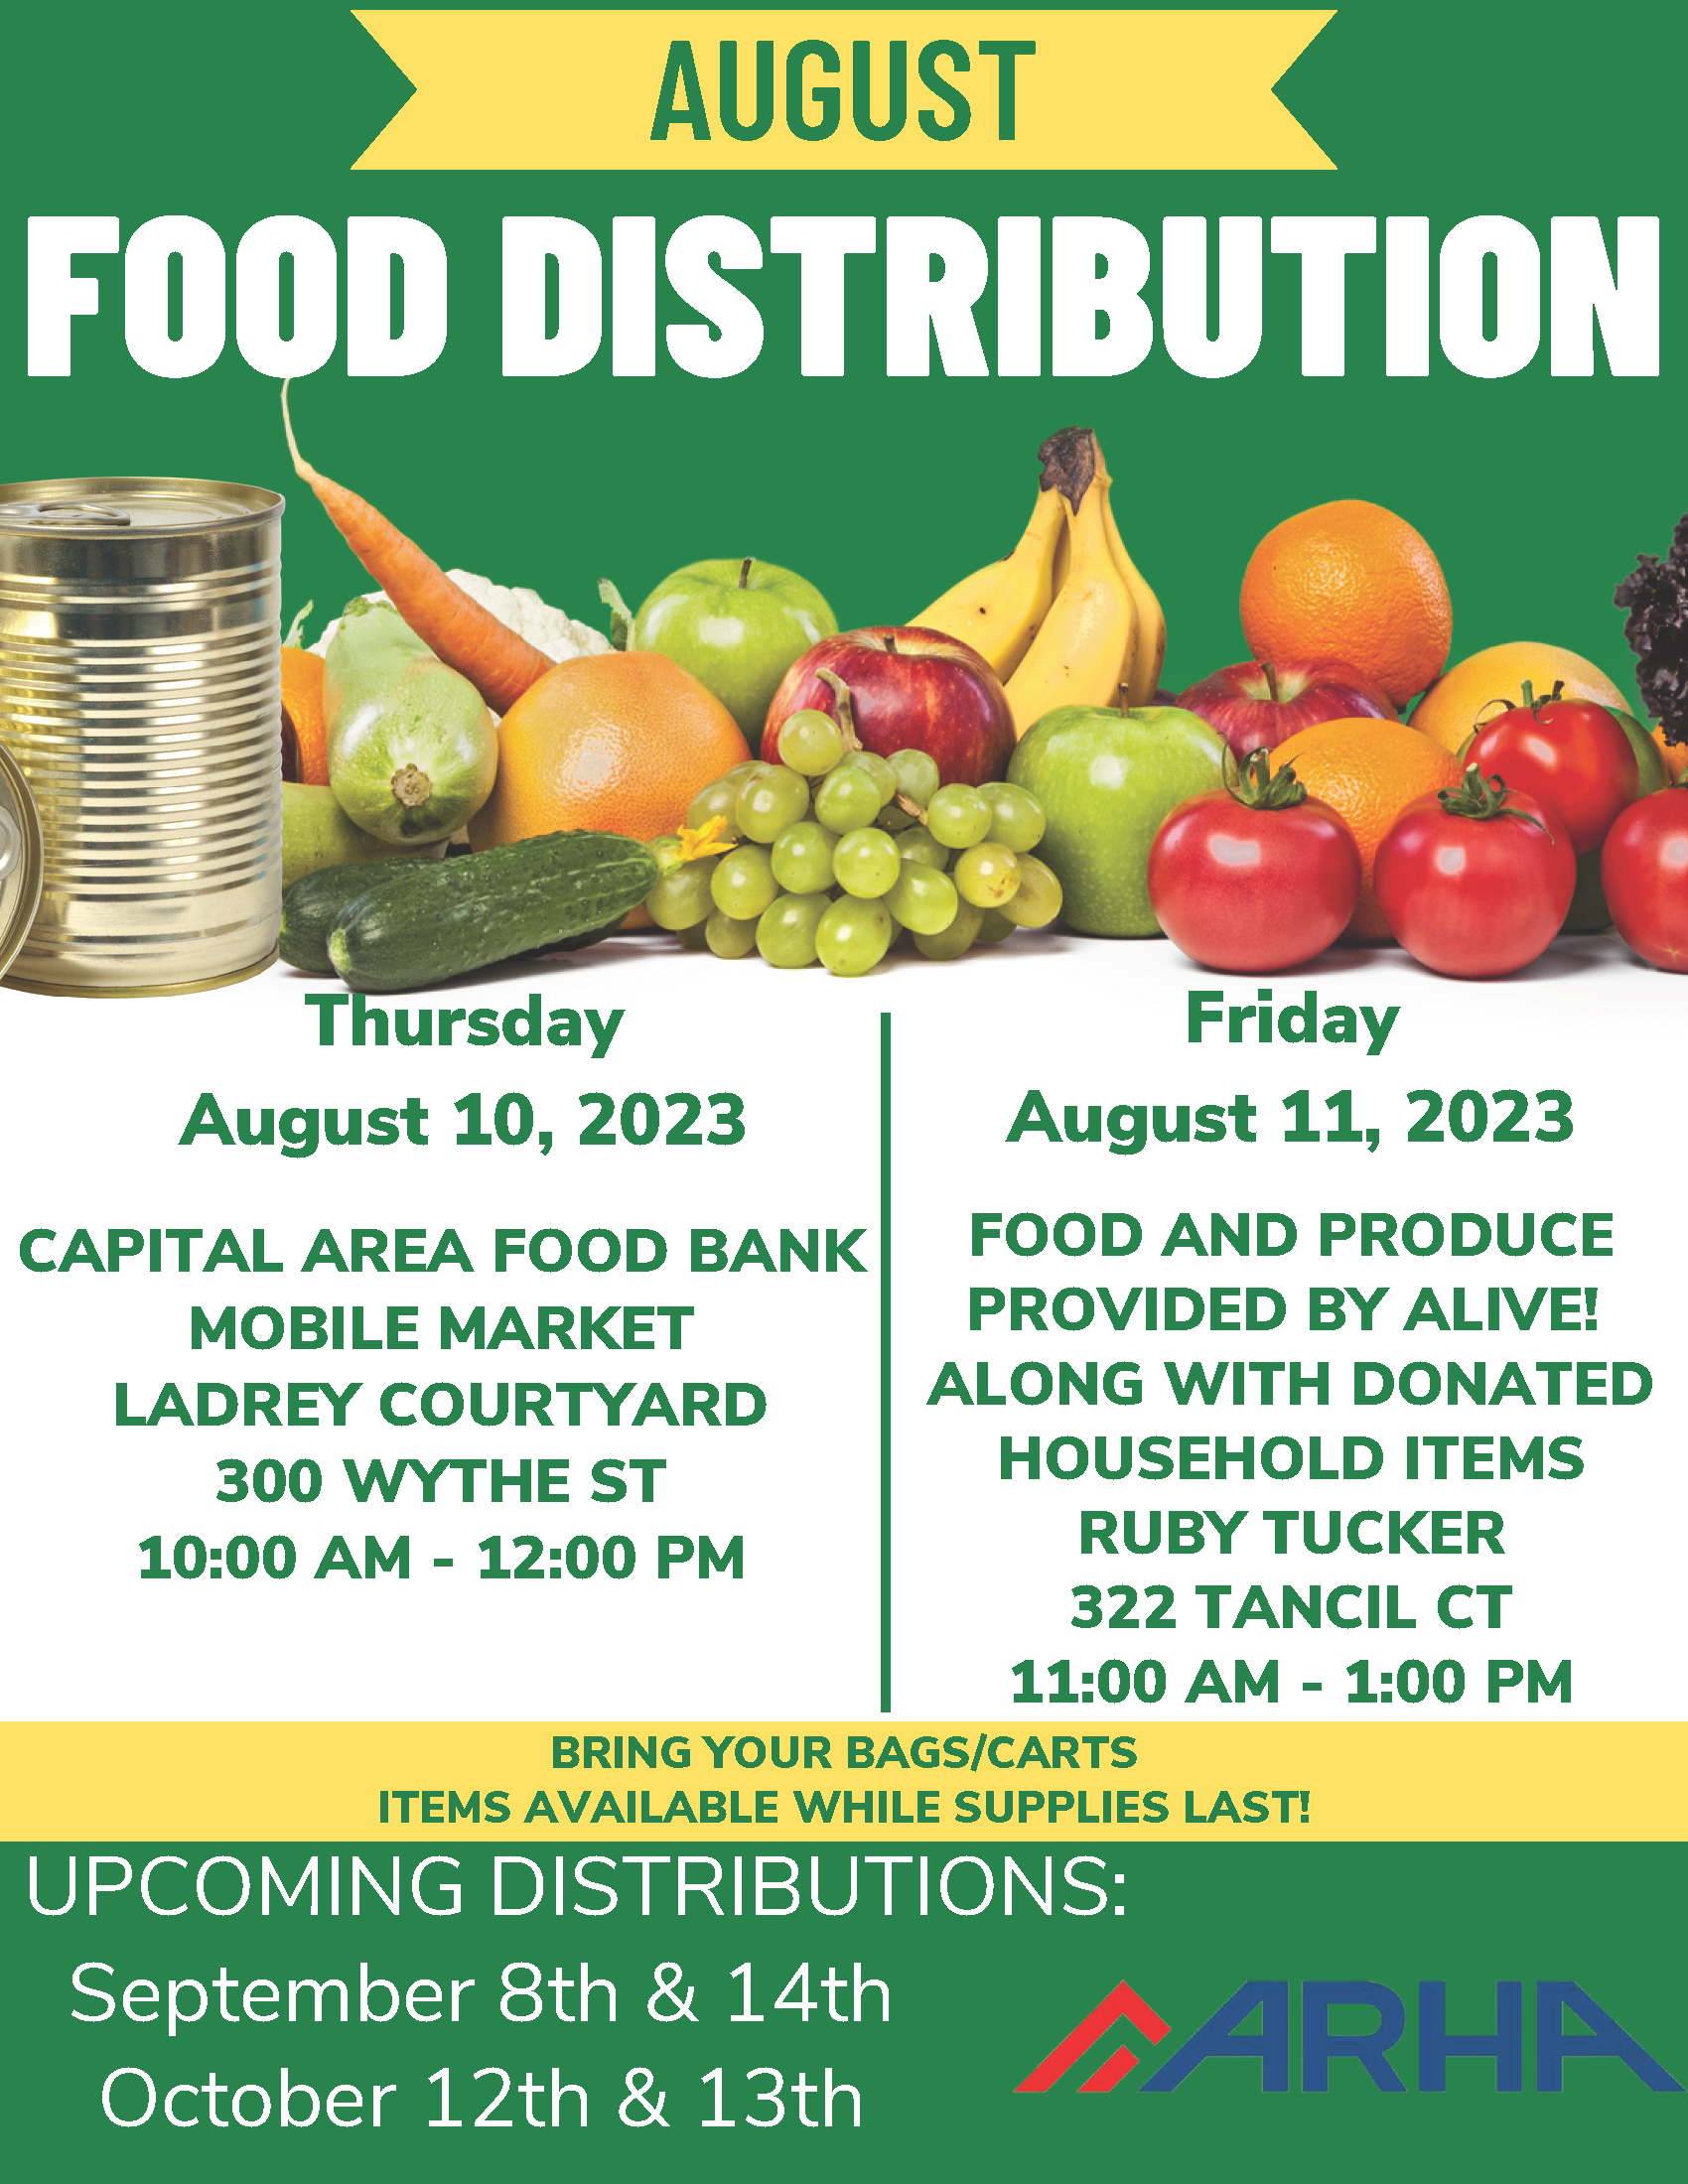 a green and white flyer with the dates and locations of the free food events: august 10 2023 from 10 am to 12 pm, 300 Wythe Street. august 11th 2023 11 am to 1pm, 322 Tancil Court